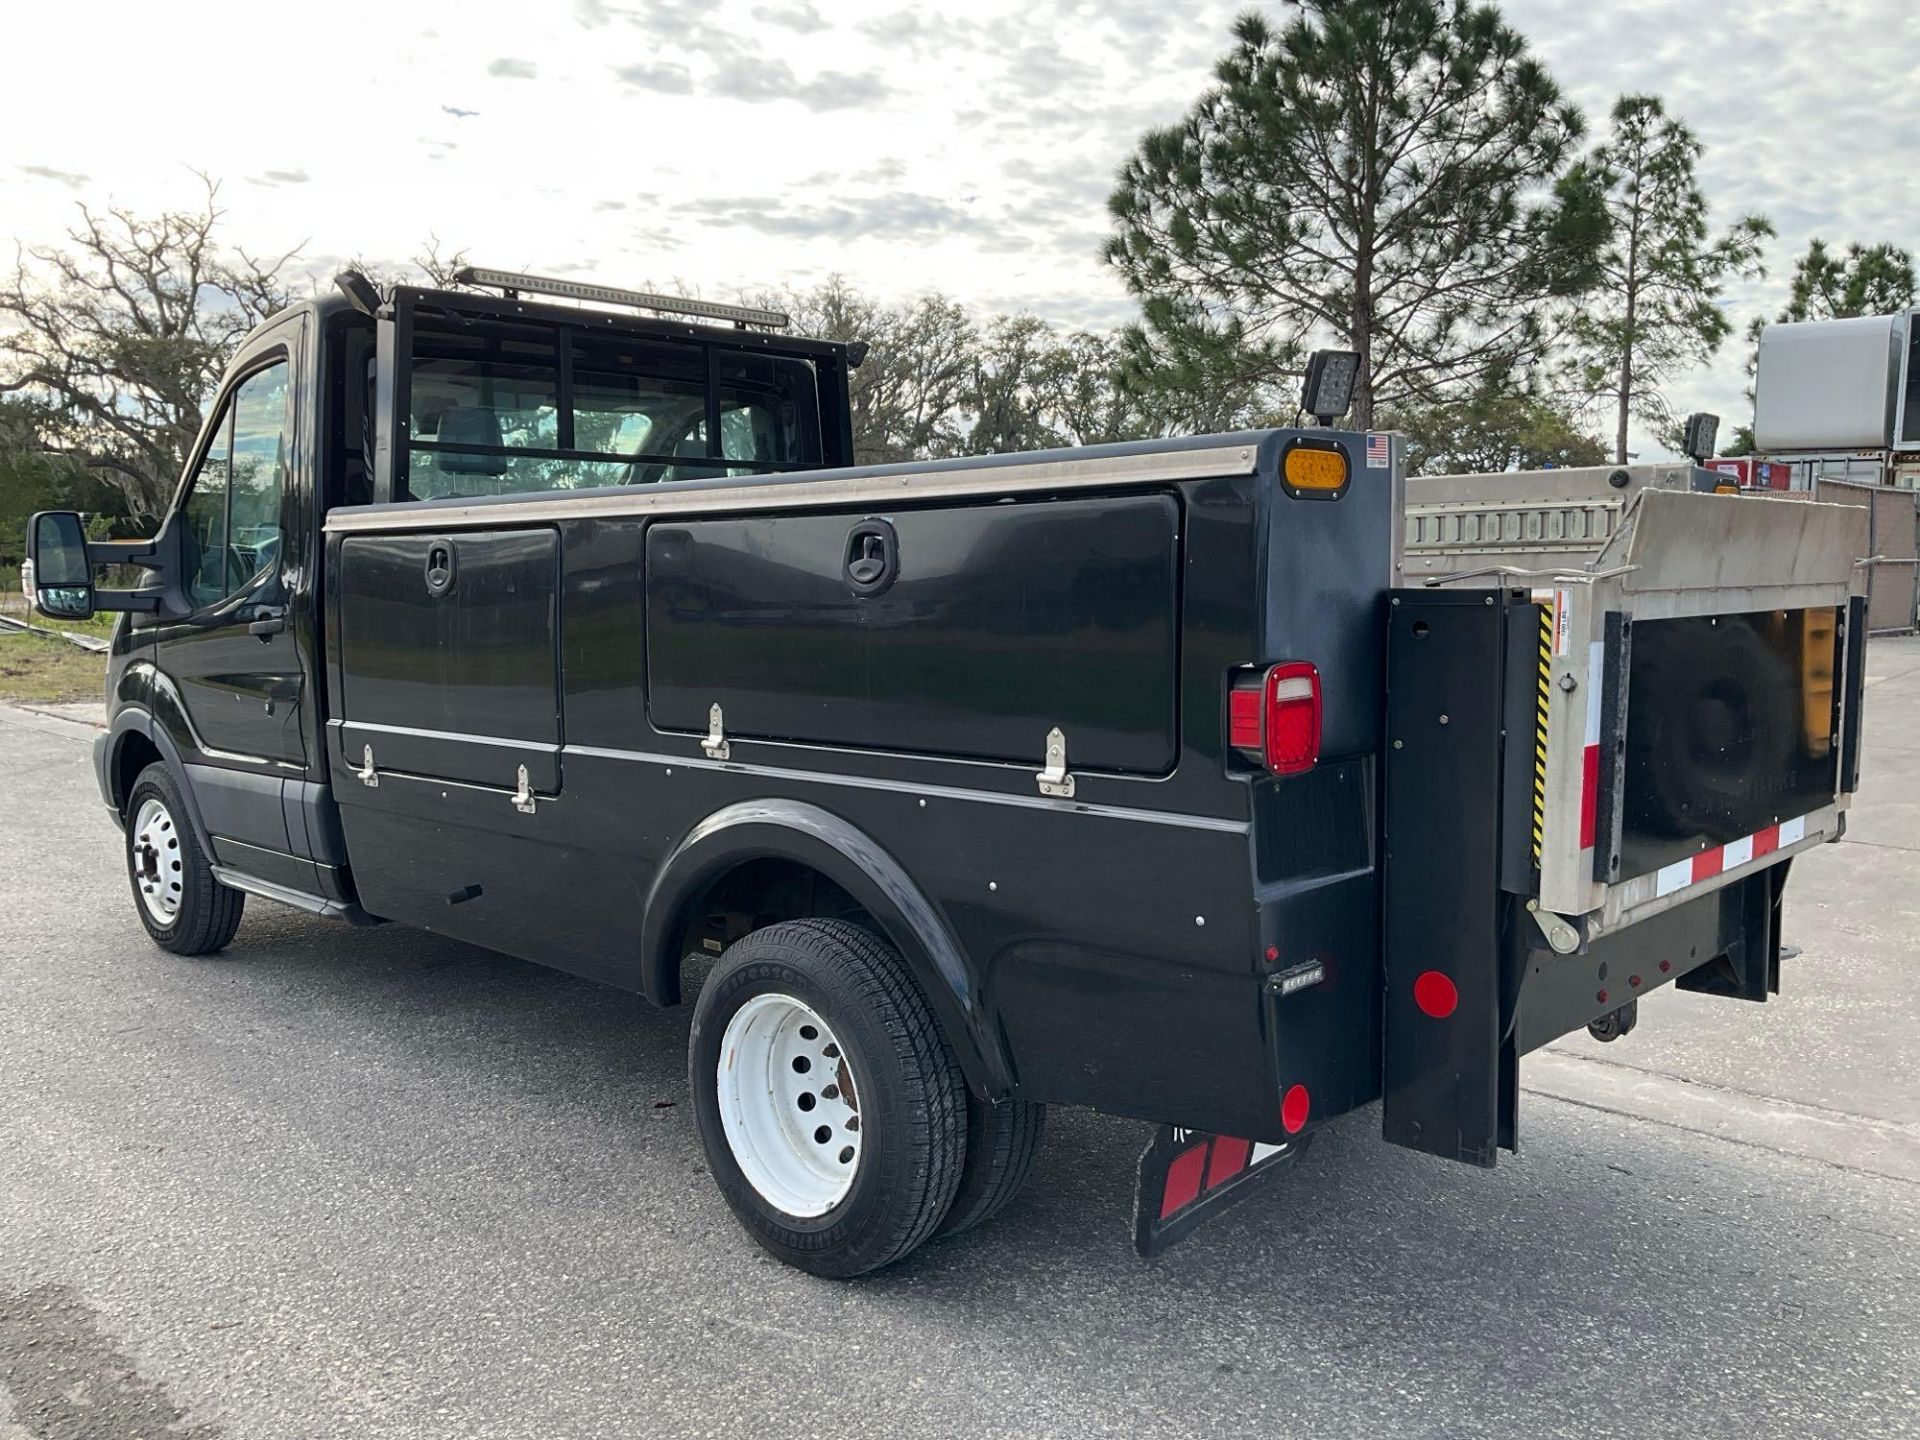 2017 FORD TRANSIT T-350 HD DRW UTILITY TRUCK , GAS POWERED AUTOMATIC, APPROX GVWR 9950LBS, STELLA... - Image 3 of 41